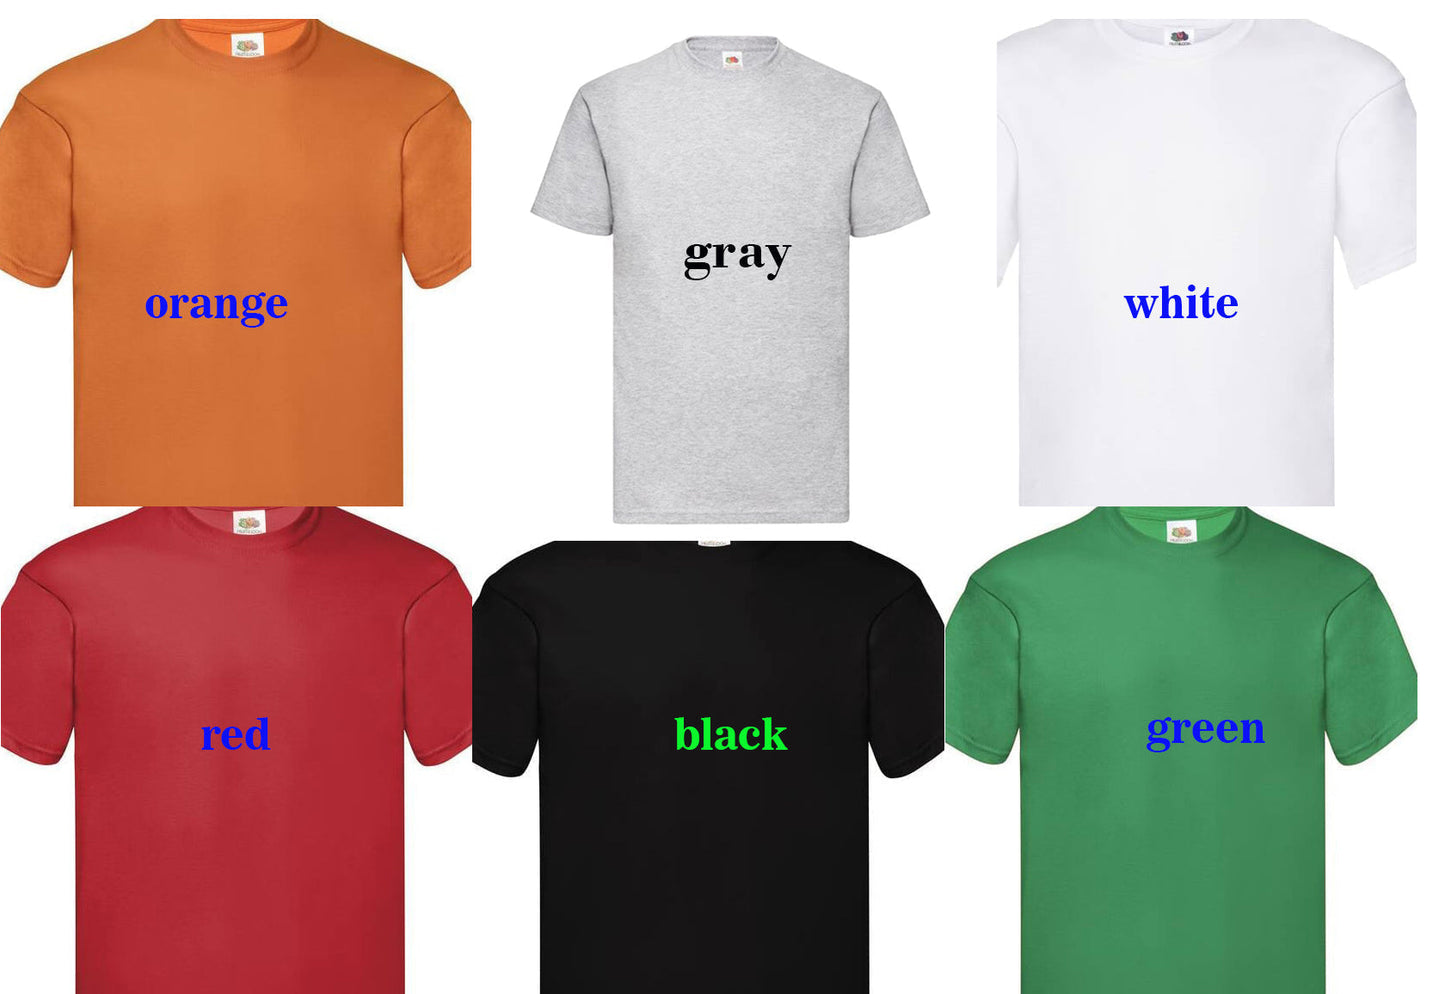 078. CRAZY FACE, Personalized T-Shirt, Custom Text, Make Your Own Shirt, Custom Tee